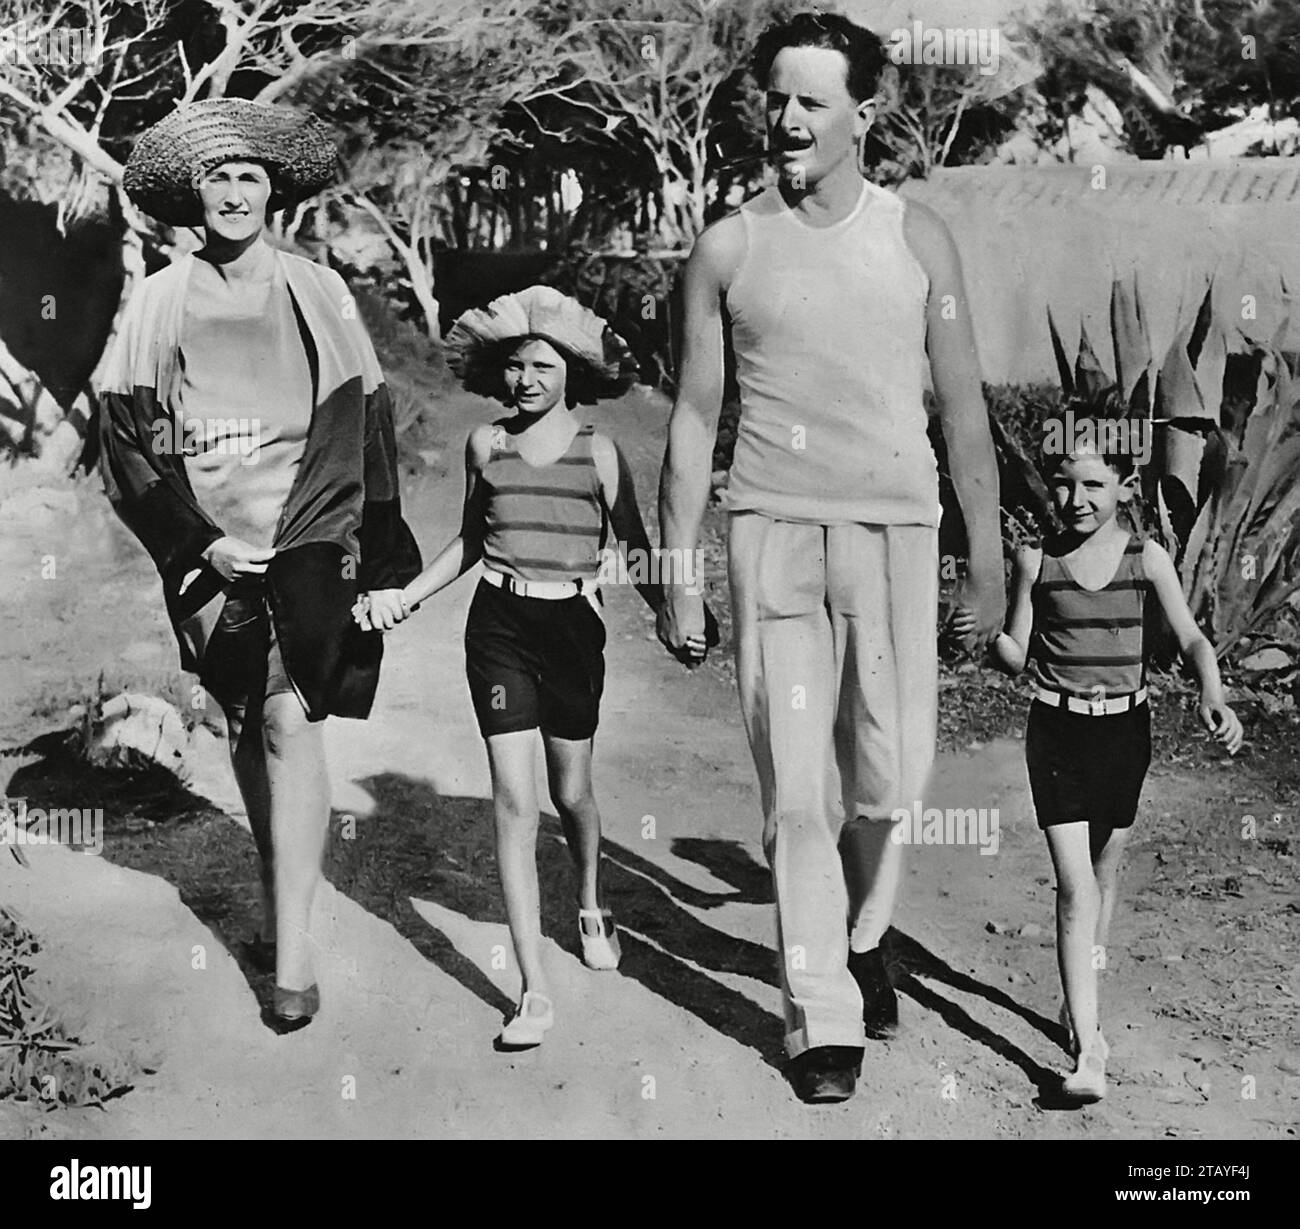 Labour MP and founder of the British Union of Fascists Sir Oswald Mosley with his wife Lady Cynthia Mosley (née Curzon) on holiday at Cap D'antibes on the French Riviera. Stock Photo